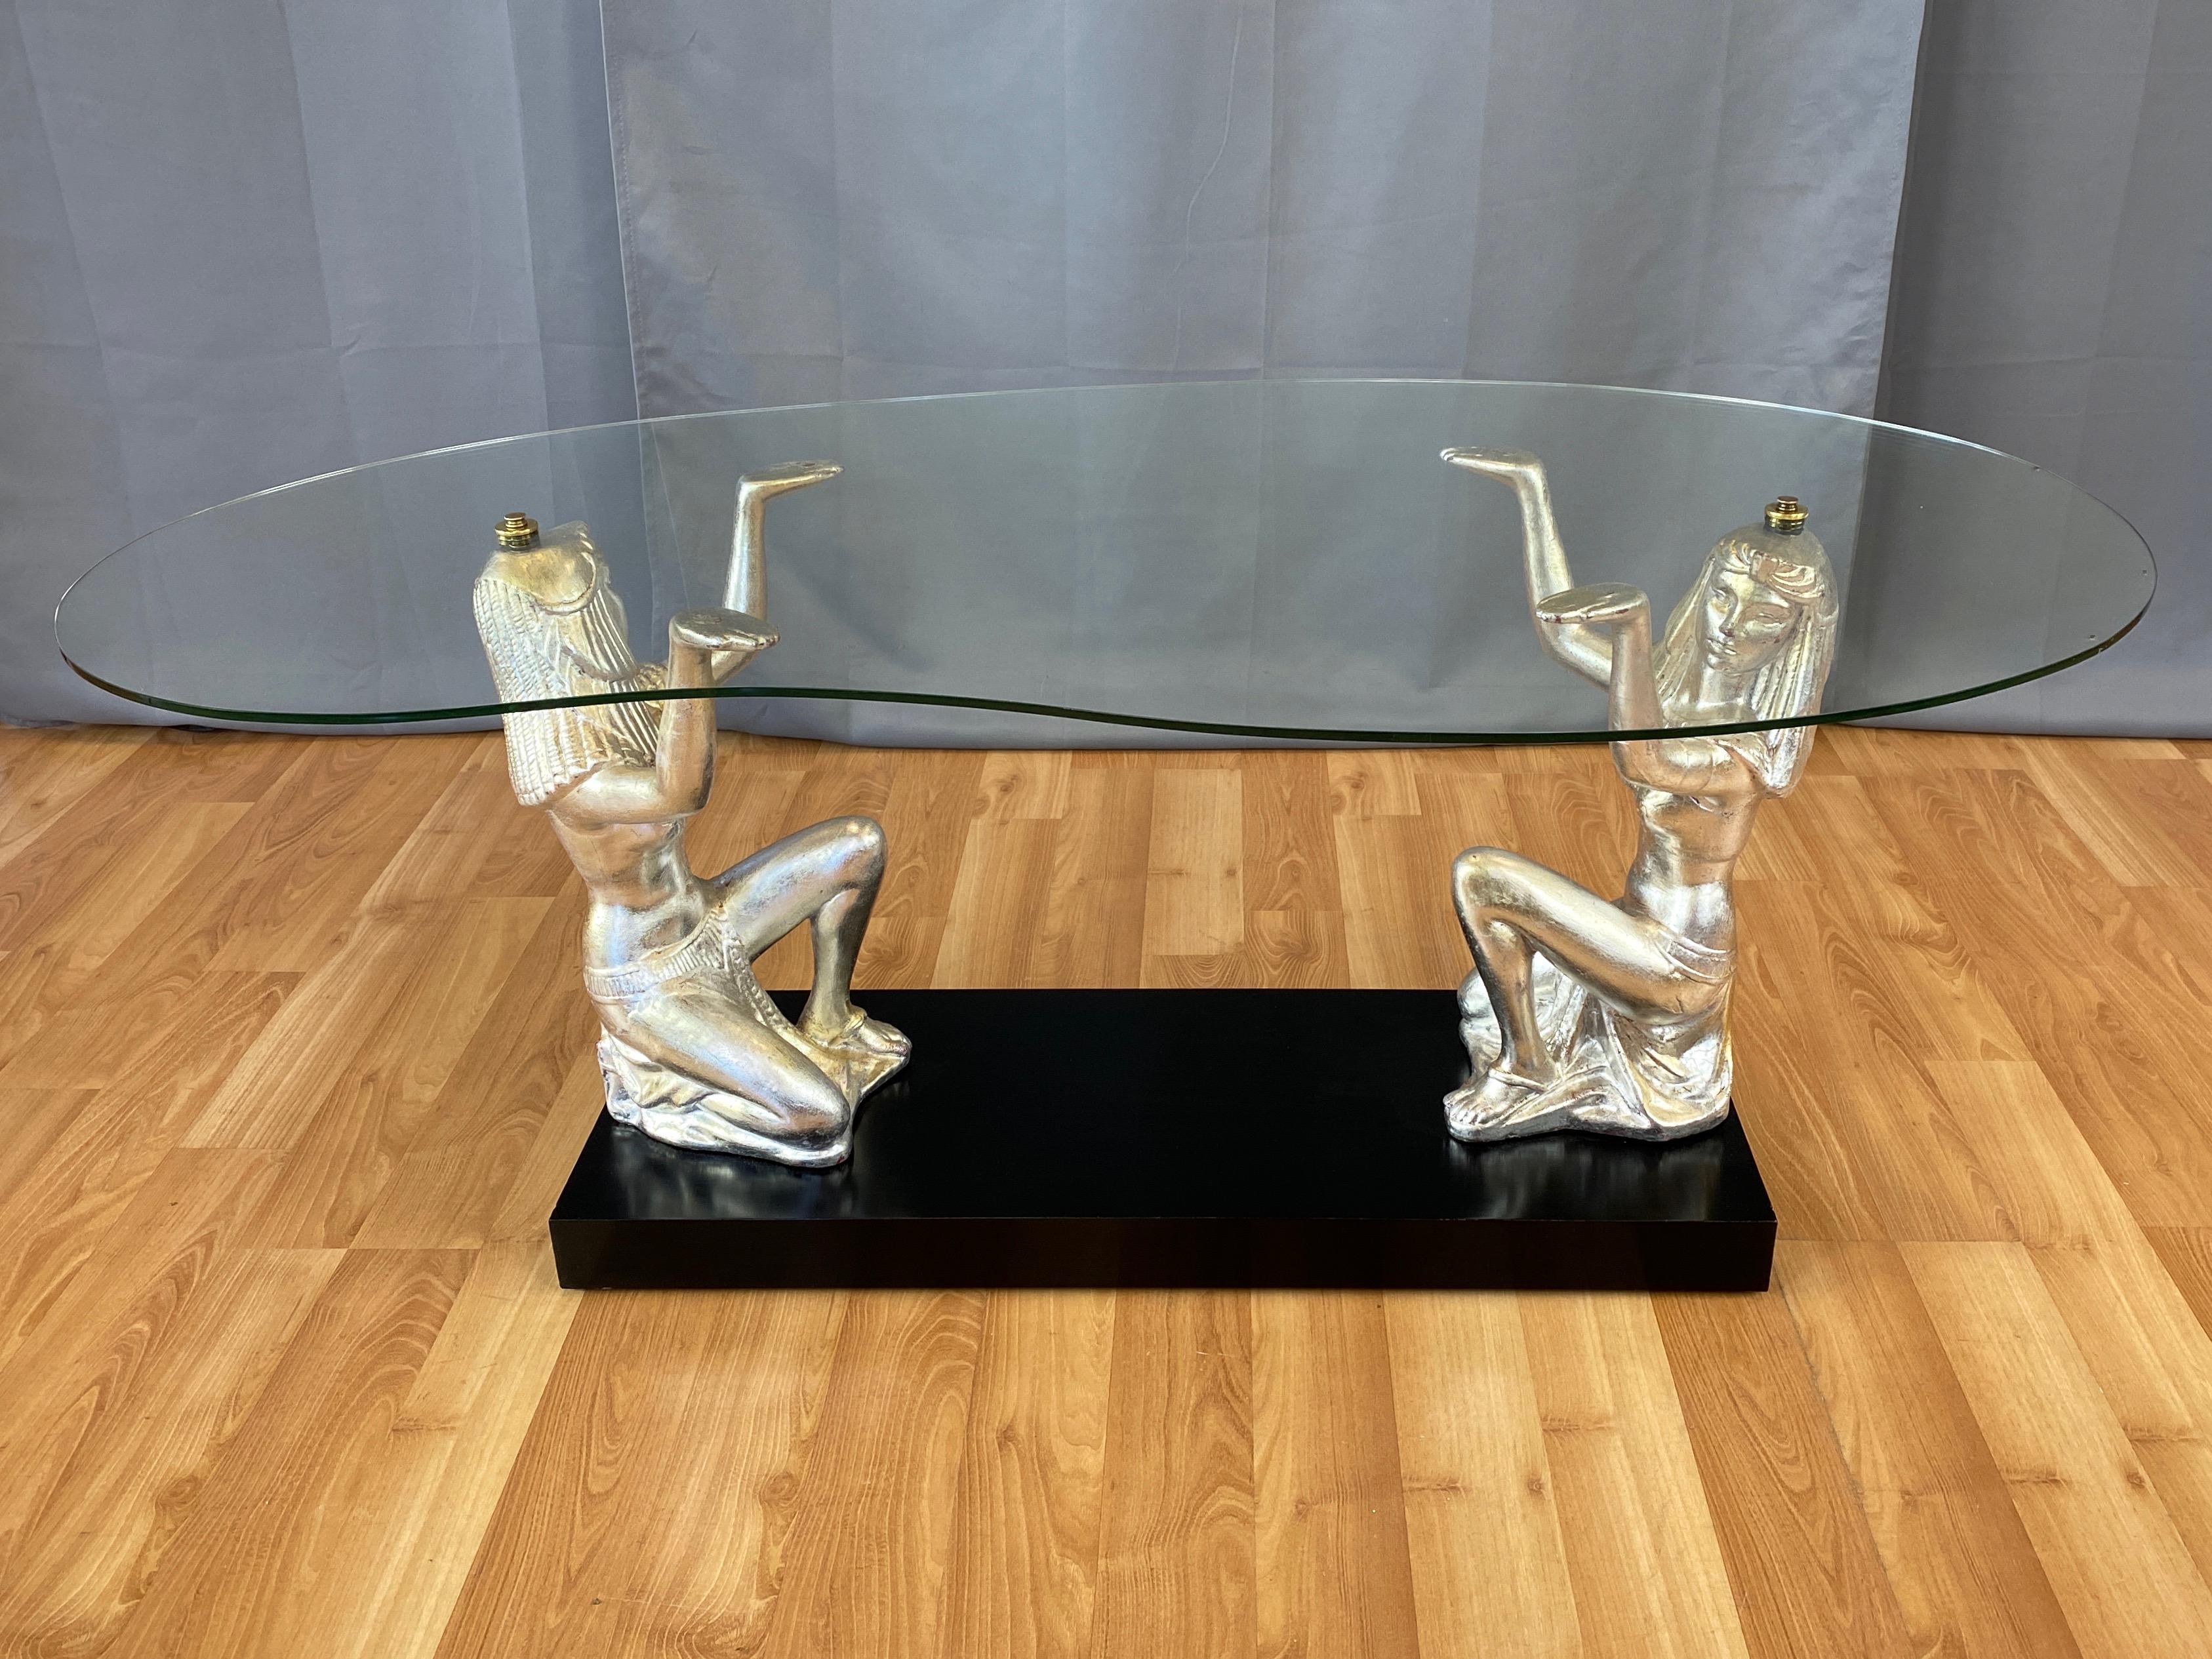 A very uncommon and uniquely stylish 1951 Egyptian Revival-inspired Hollywood Regency figural glass top coffee table by California Lamps & Shades Company.

Free-form glass top held regally aloft by a strikingly beautiful and sculptural pair of lithe